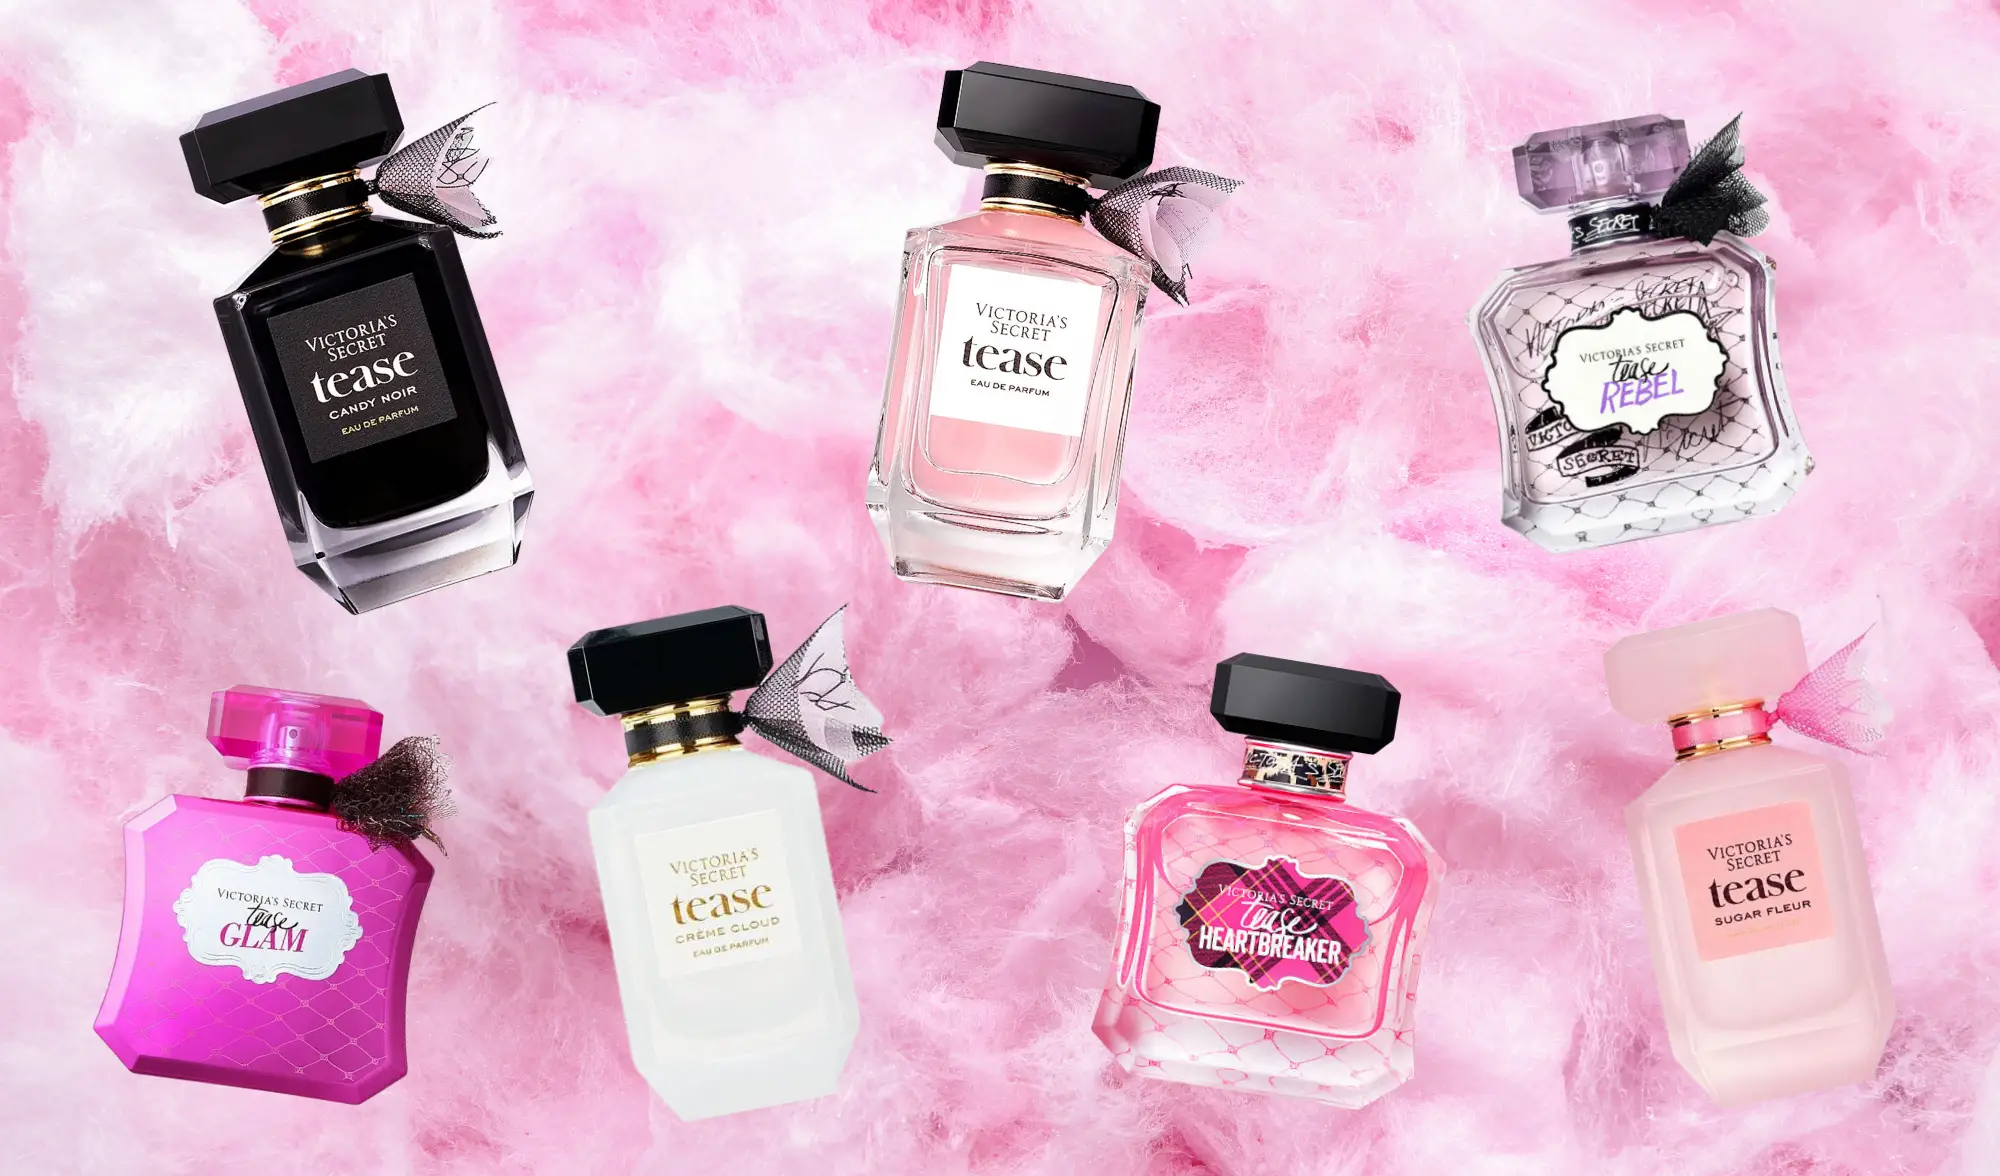 Ang Ultimate Guide To The Victoria's Secret Tease Perfumes | SOKI LONDON